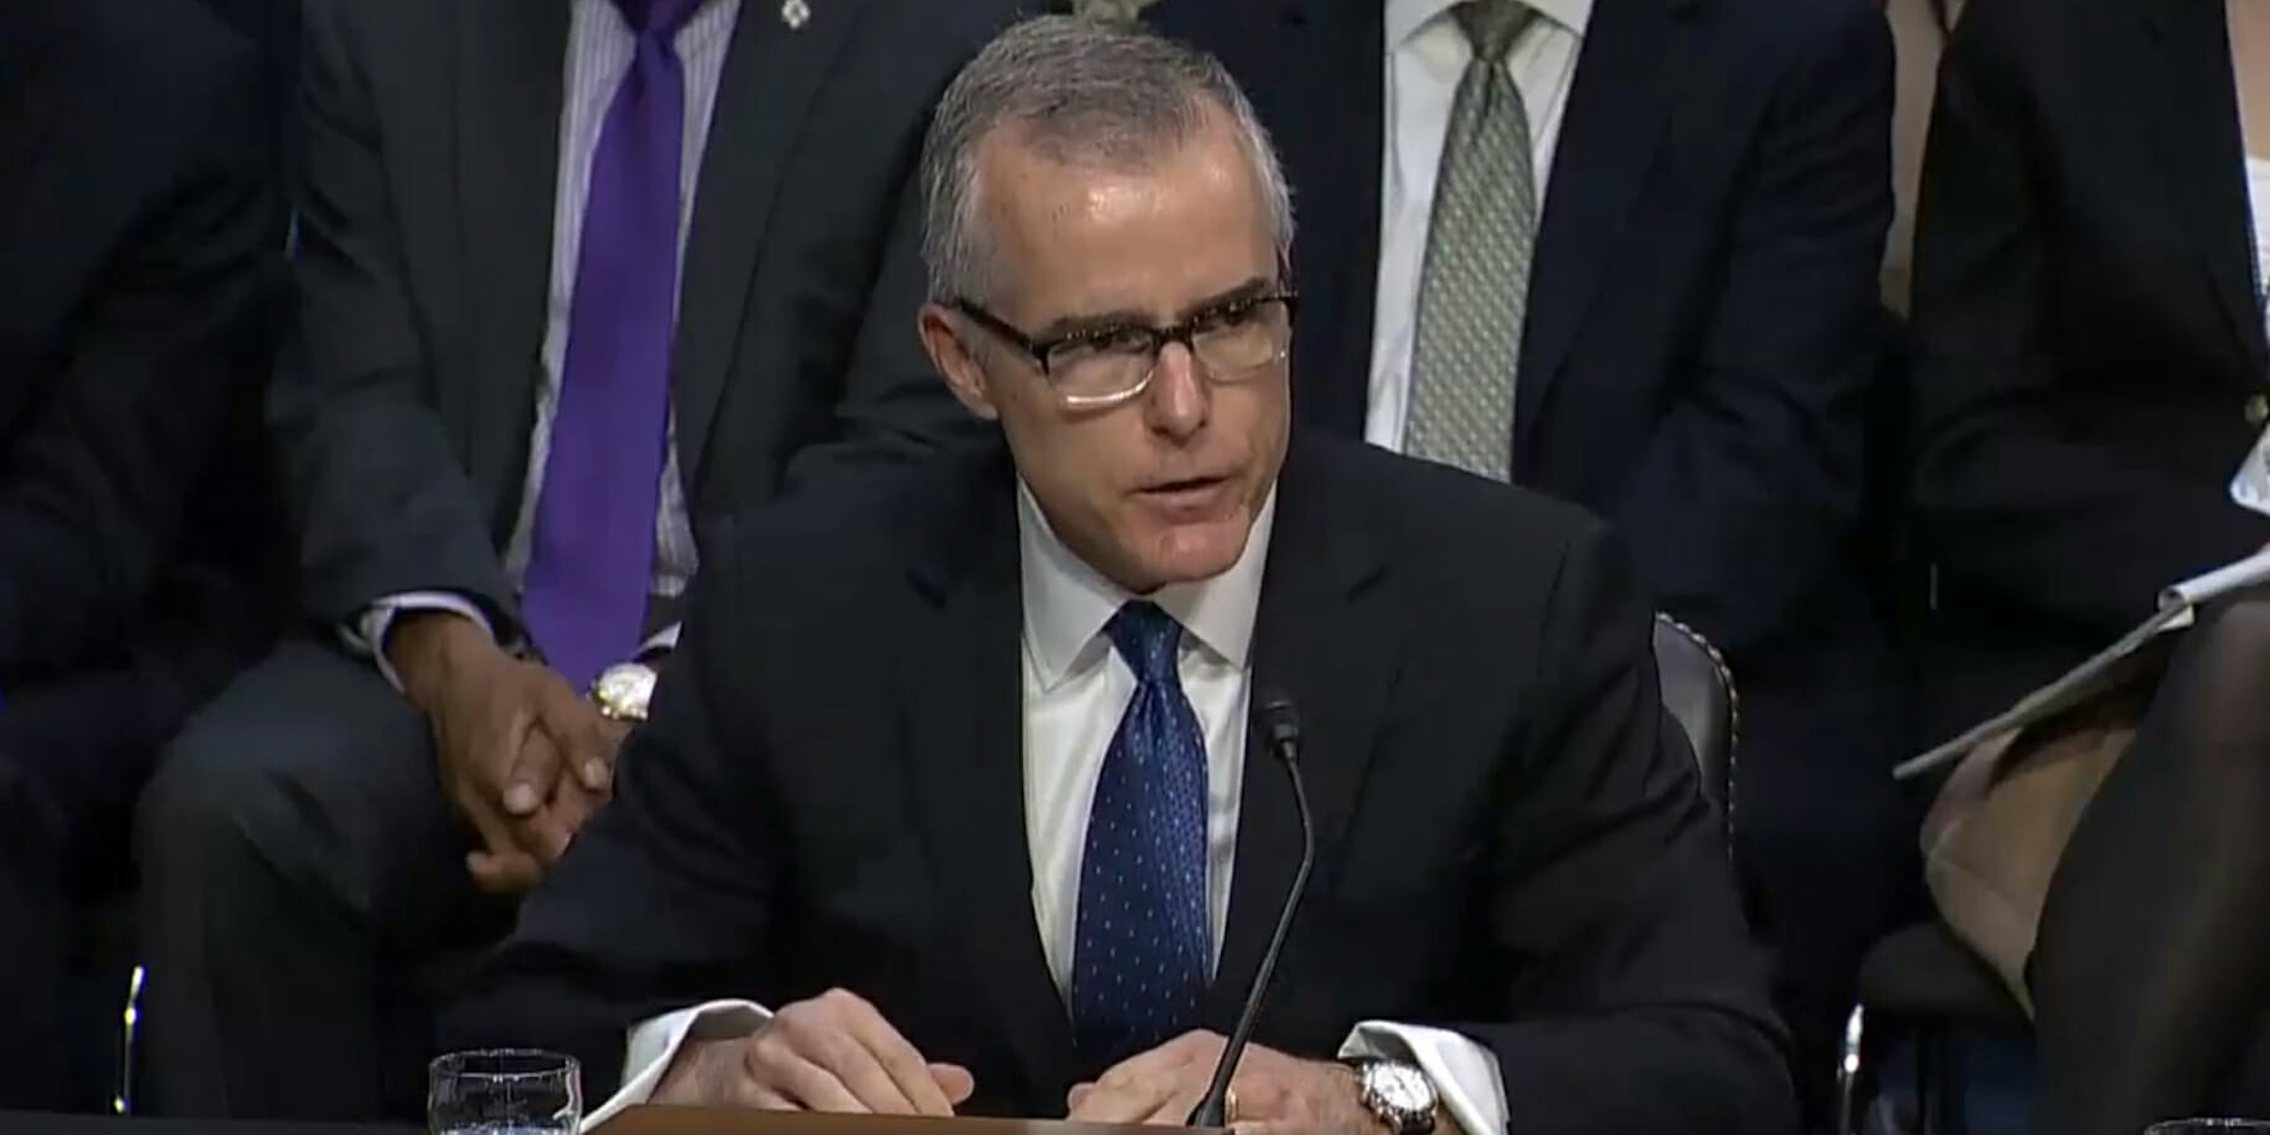 Acting FBI Director Andrew McCabe refuted the claim that former FBI Director James Comey had lost the confidence of agency employees.